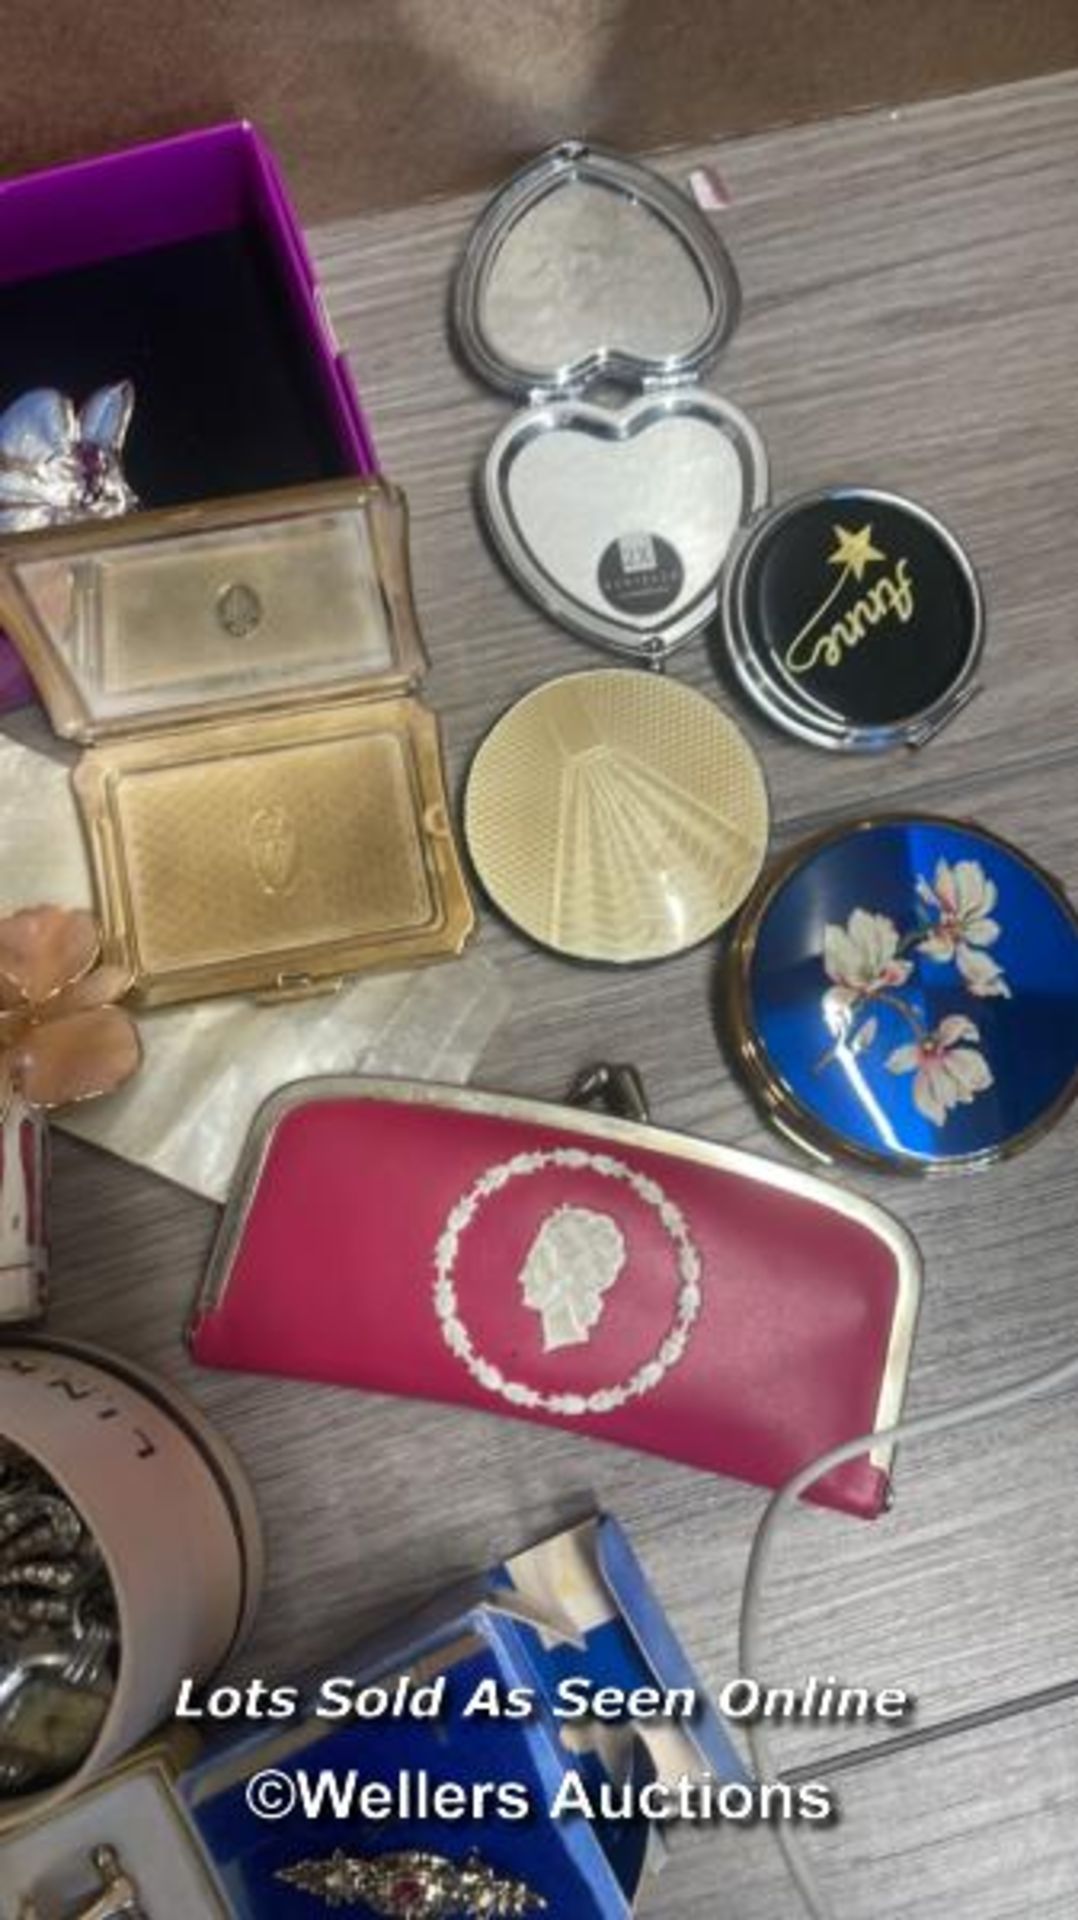 A LARGE QUANTITY OF COSTUME JEWELLERY, COMPACTS AND WATCHES - Image 3 of 12